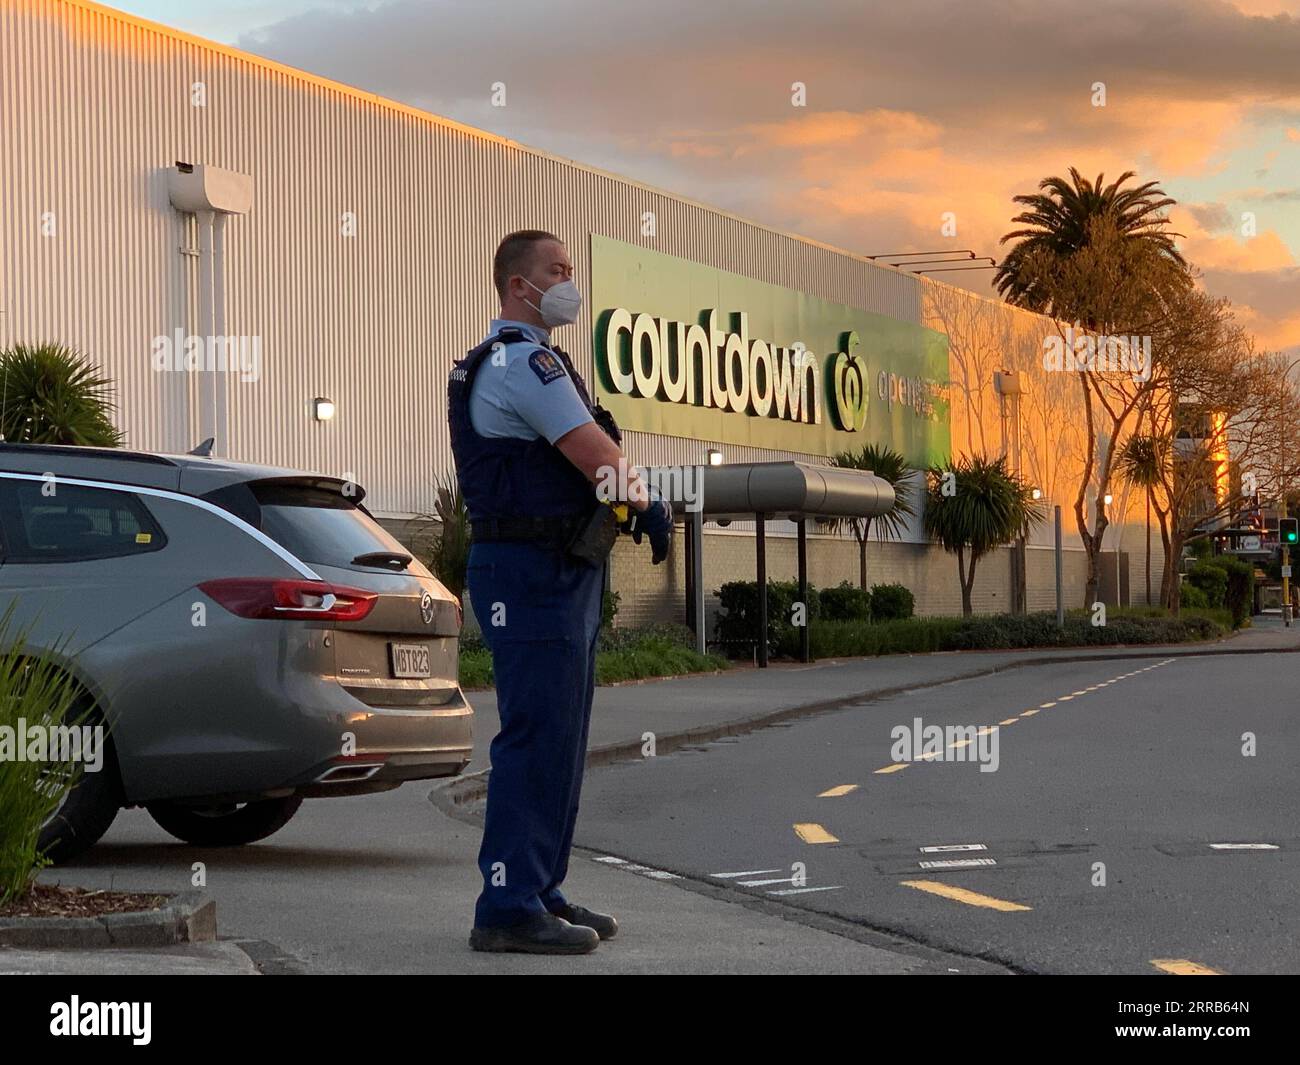 210903 -- AUCKLAND, Sept. 3, 2021 -- A police officer stands guard outside the New Lynn supermarket in Auckland, New Zealand, Sept. 3, 2021. New Zealand Prime Minister Jacinda Ardern confirmed that the violent attack that happened at New Lynn supermarket in Auckland at 2:40 p.m. local time Friday was a terrorist attack carried out by an extremist. Photo by /Xinhua NEW ZEALAND-AUCKLAND-SUPERMARKET-TERRORIST ATTACK ZhaoxGang PUBLICATIONxNOTxINxCHN Stock Photo